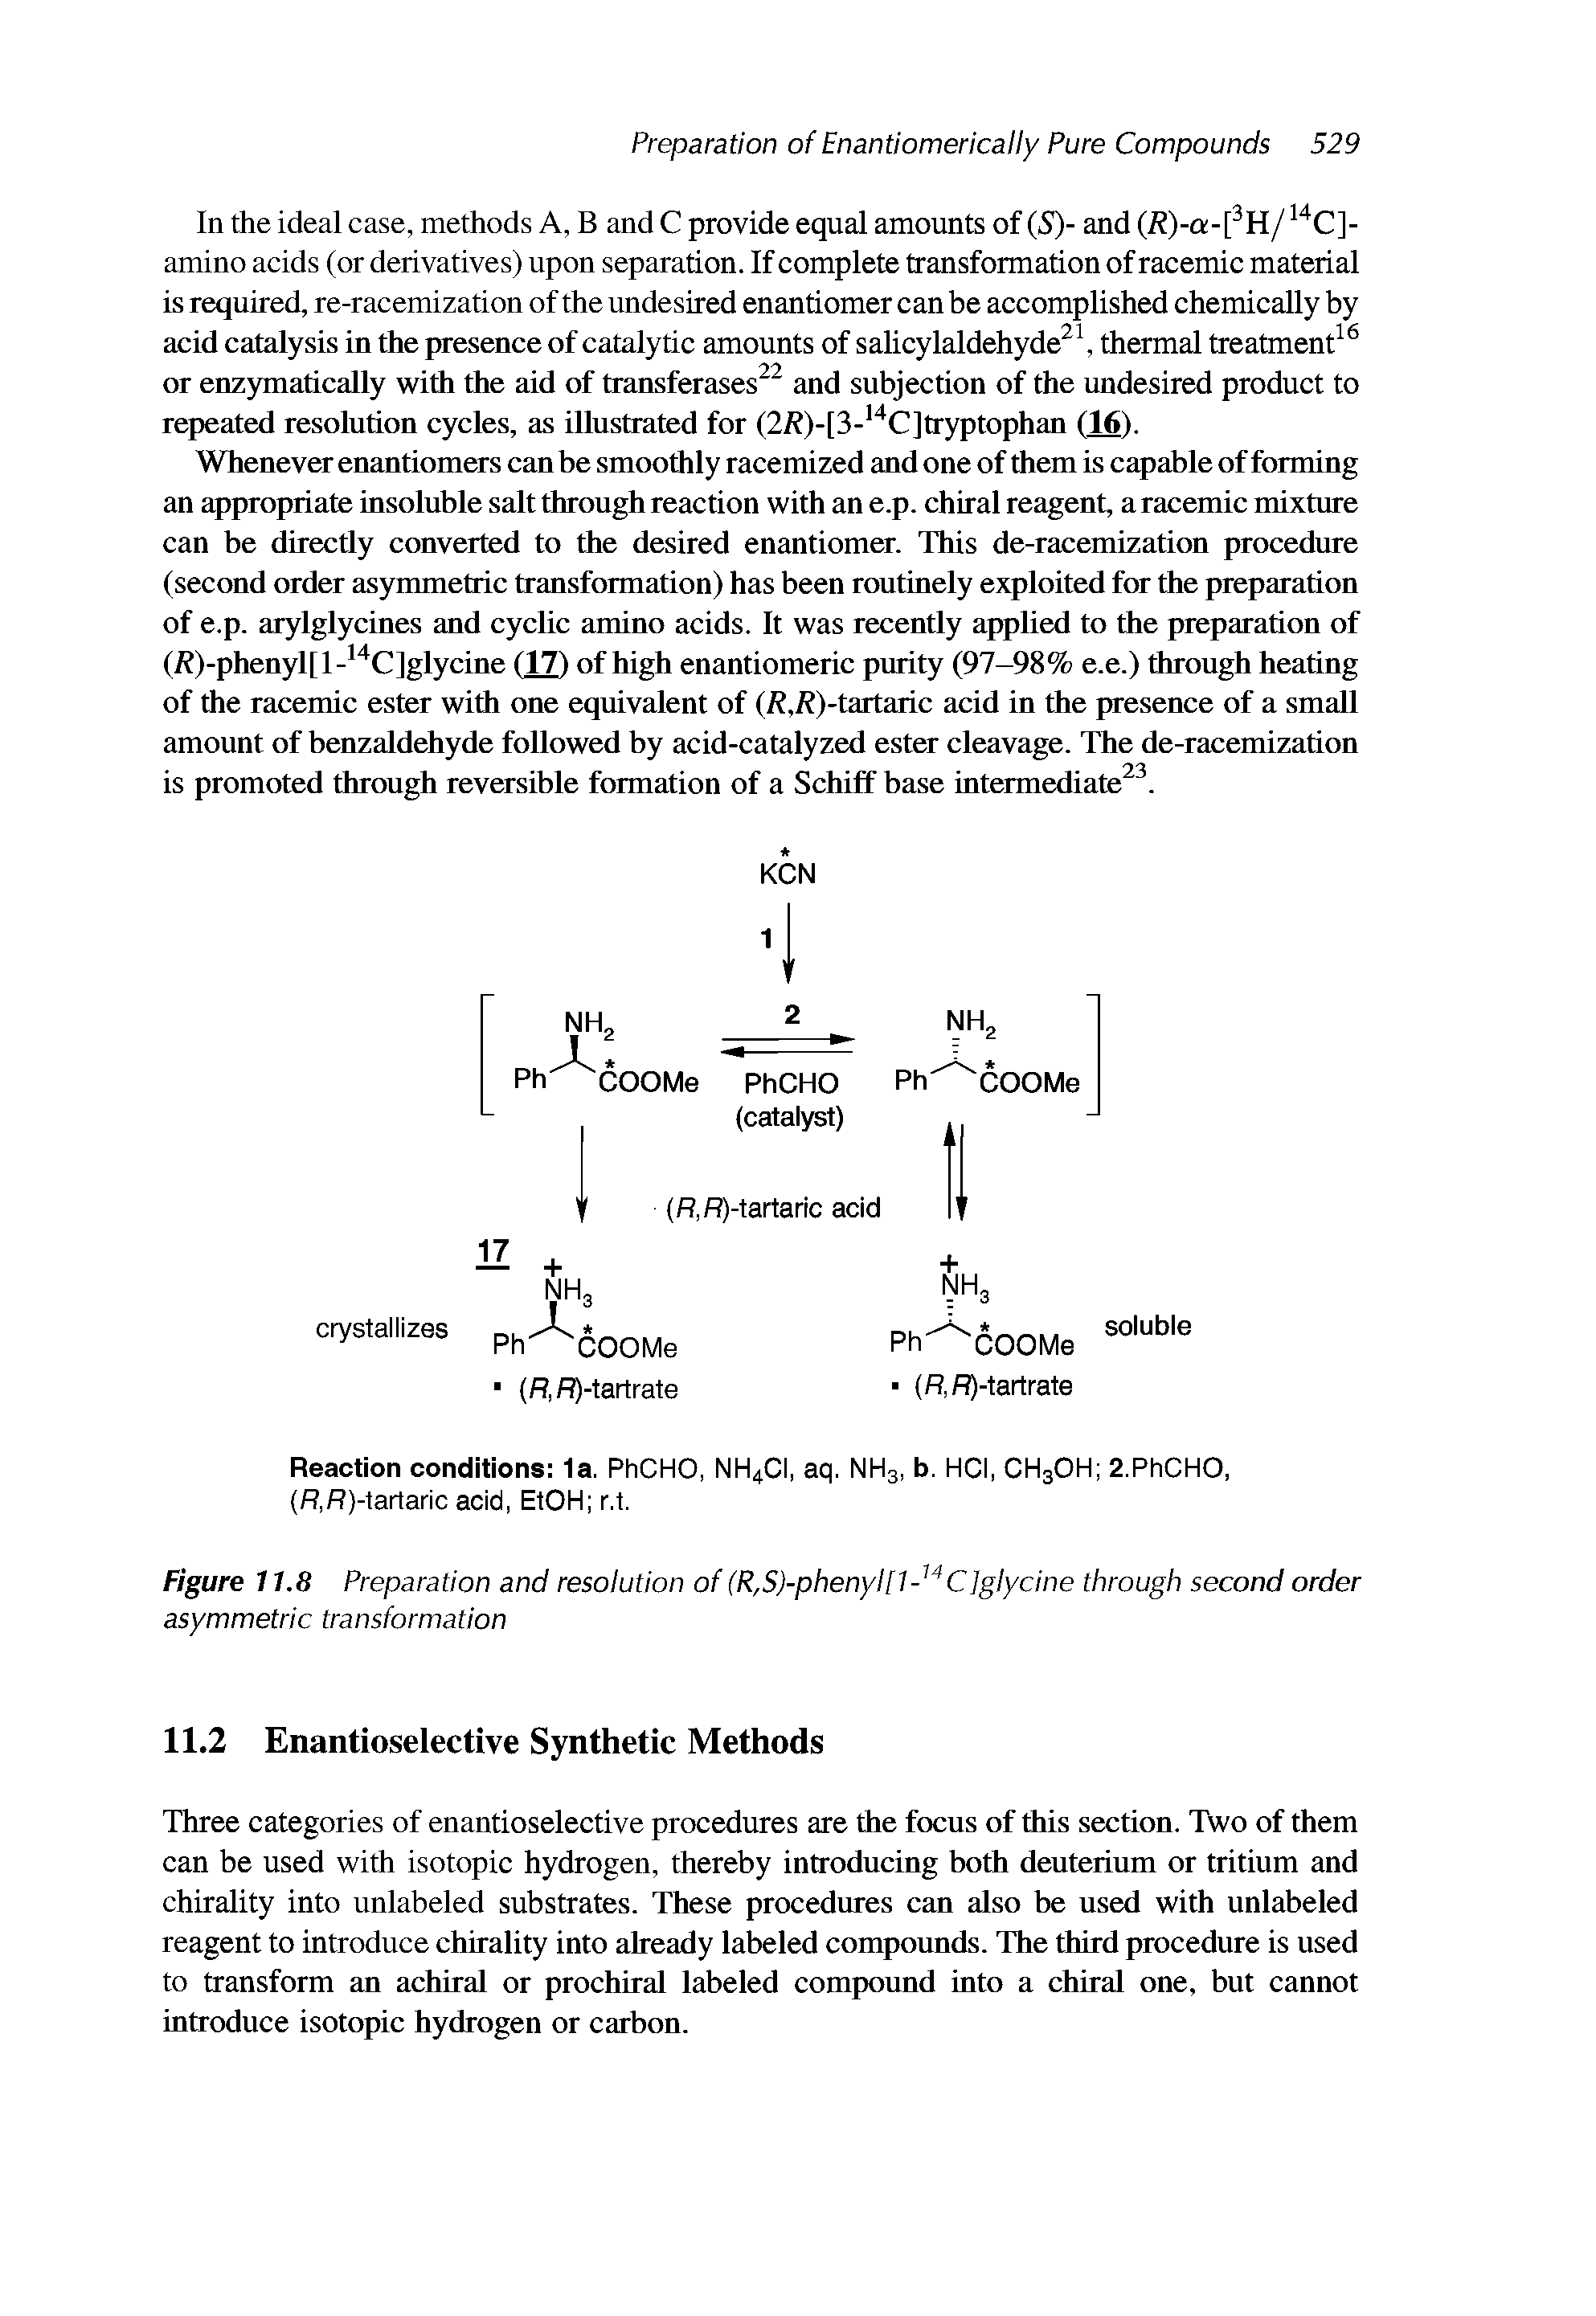 Figure 11.8 Preparation and resolution of (R,S)-phenyl[i- CIglycine through second order asymmetric transformation...